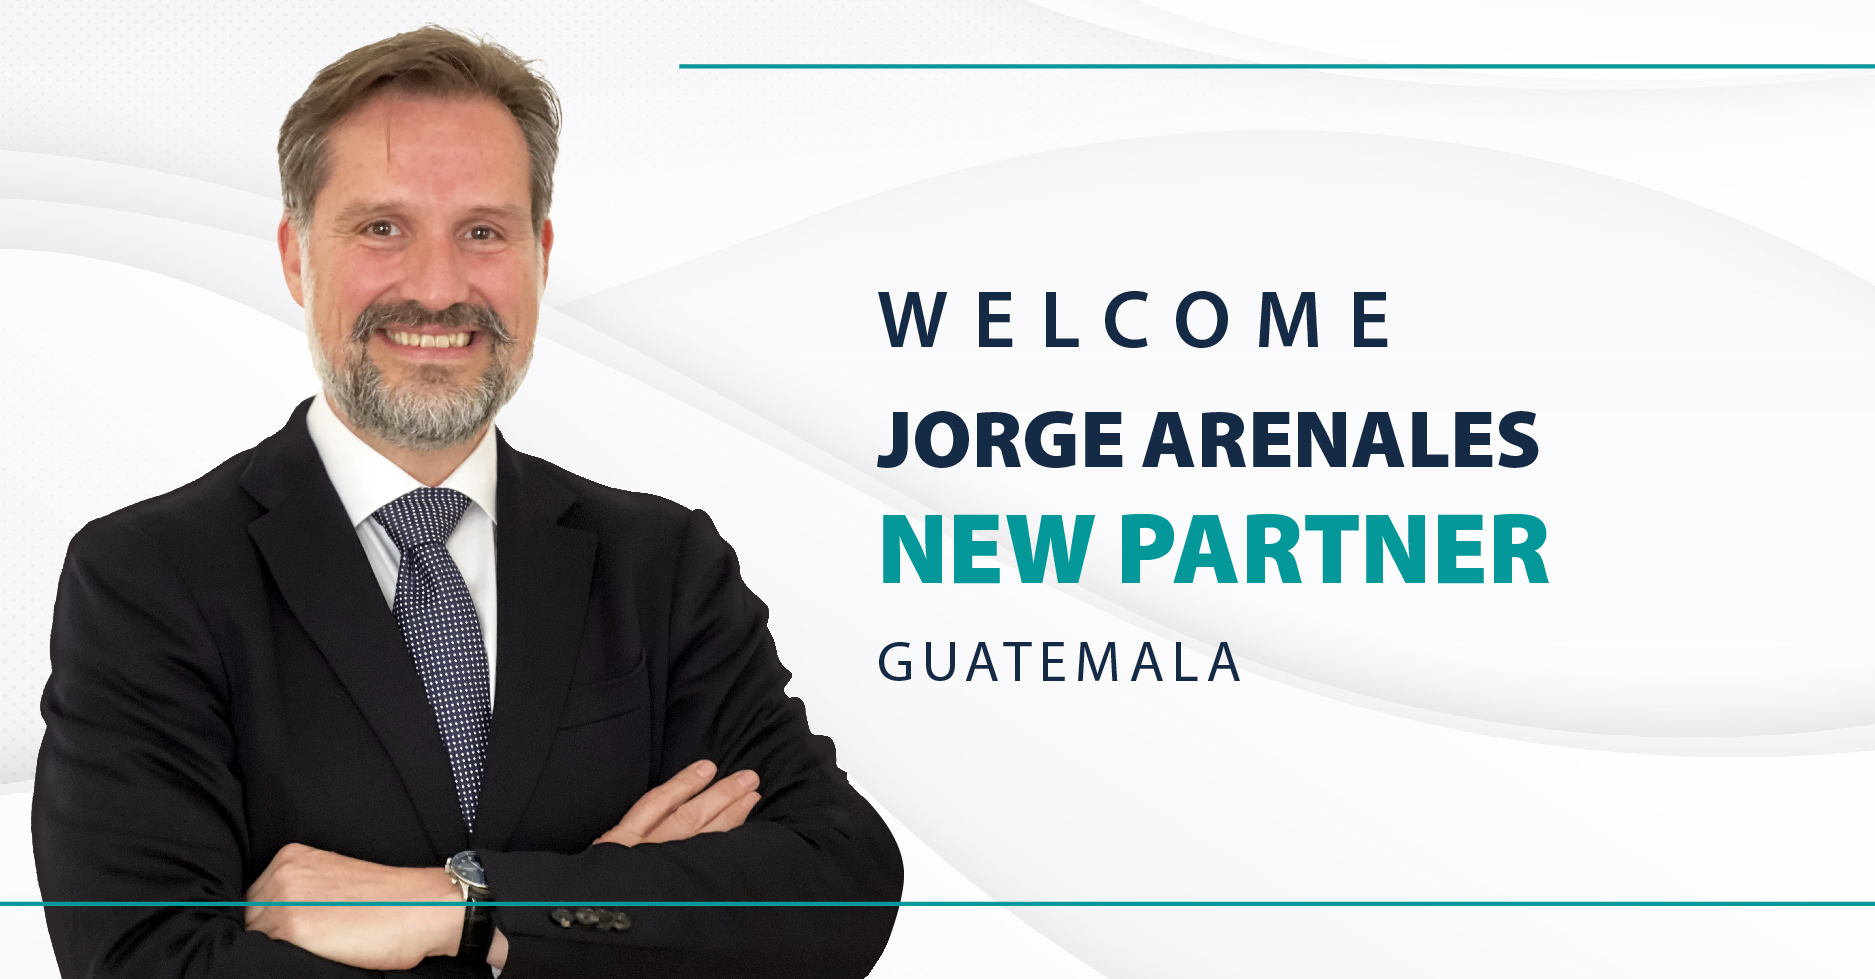 Jorge Arenales joins BLP, bolstering the Firm's expertise in Corporate, Transaction and Finance matters